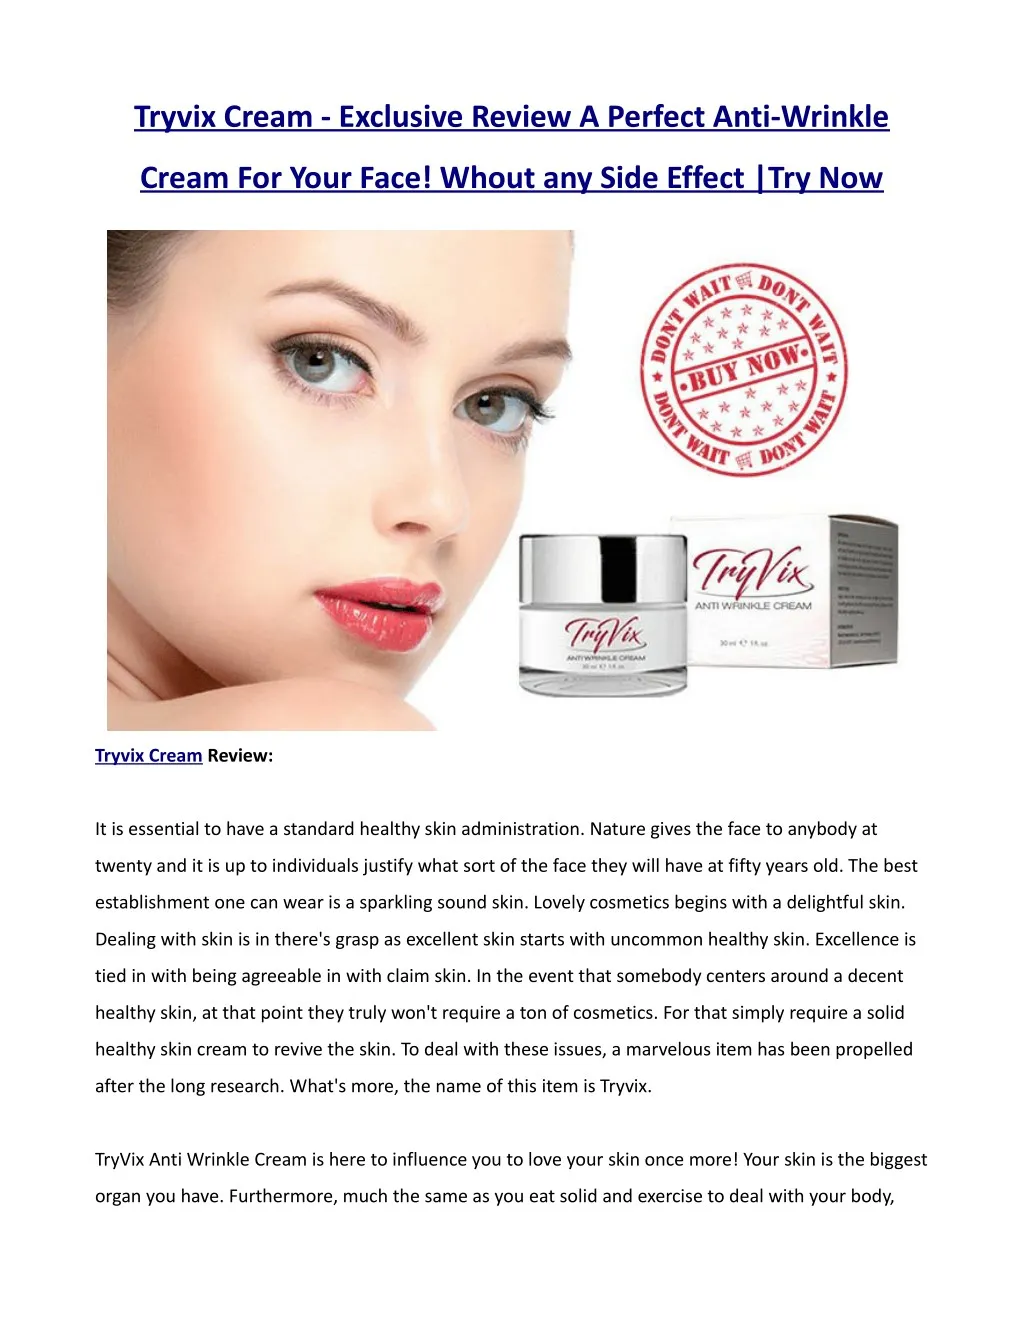 tryvix cream exclusive review a perfect anti